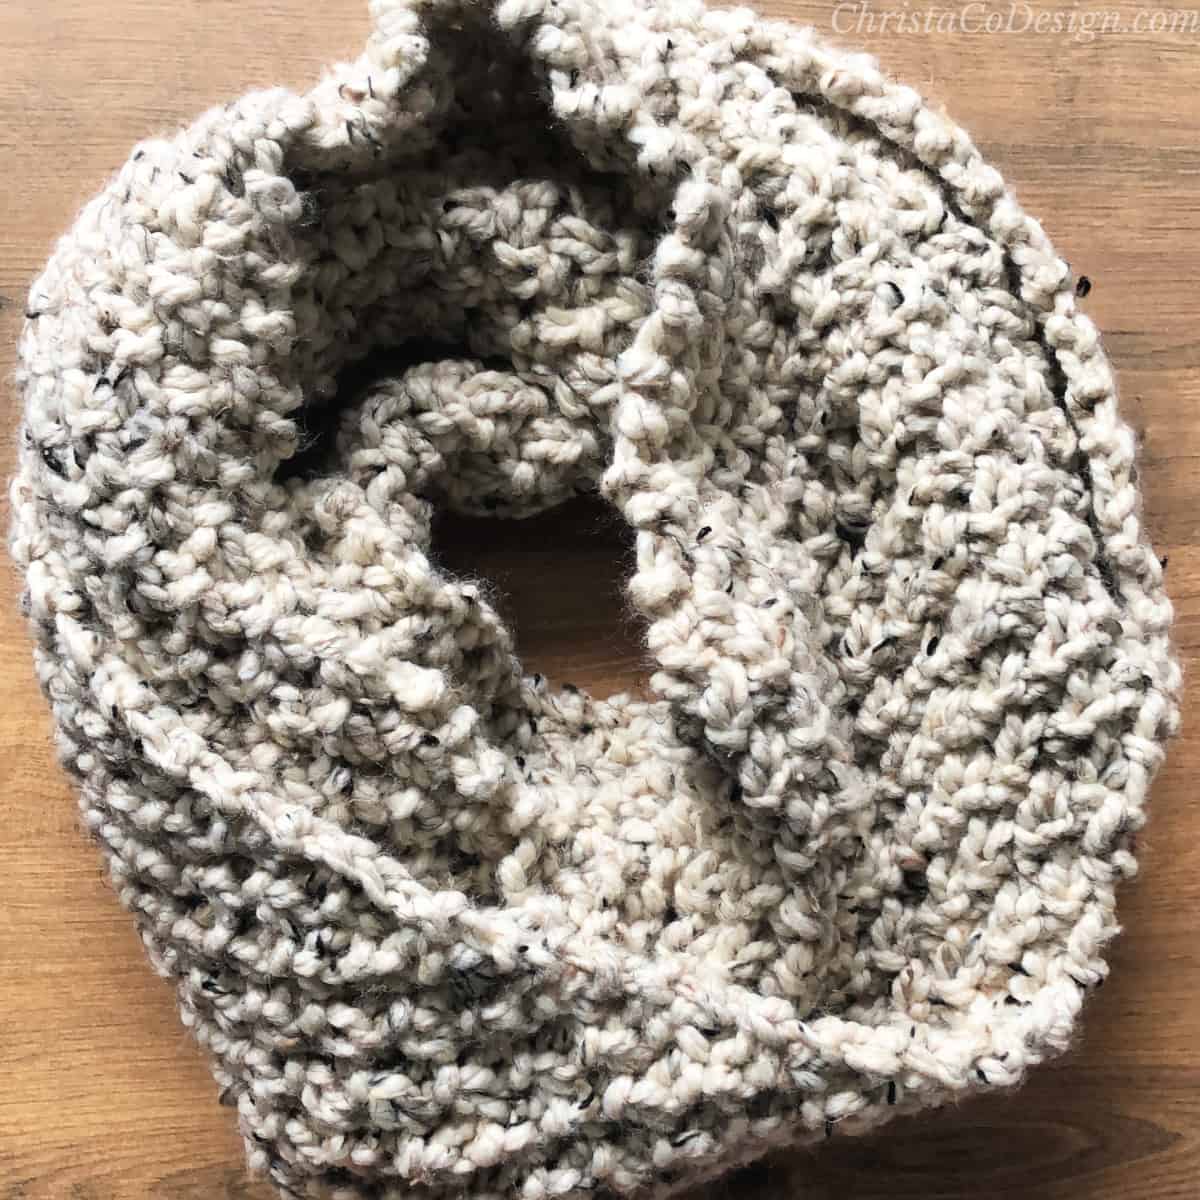 Textured snood wrapped in circle on table.